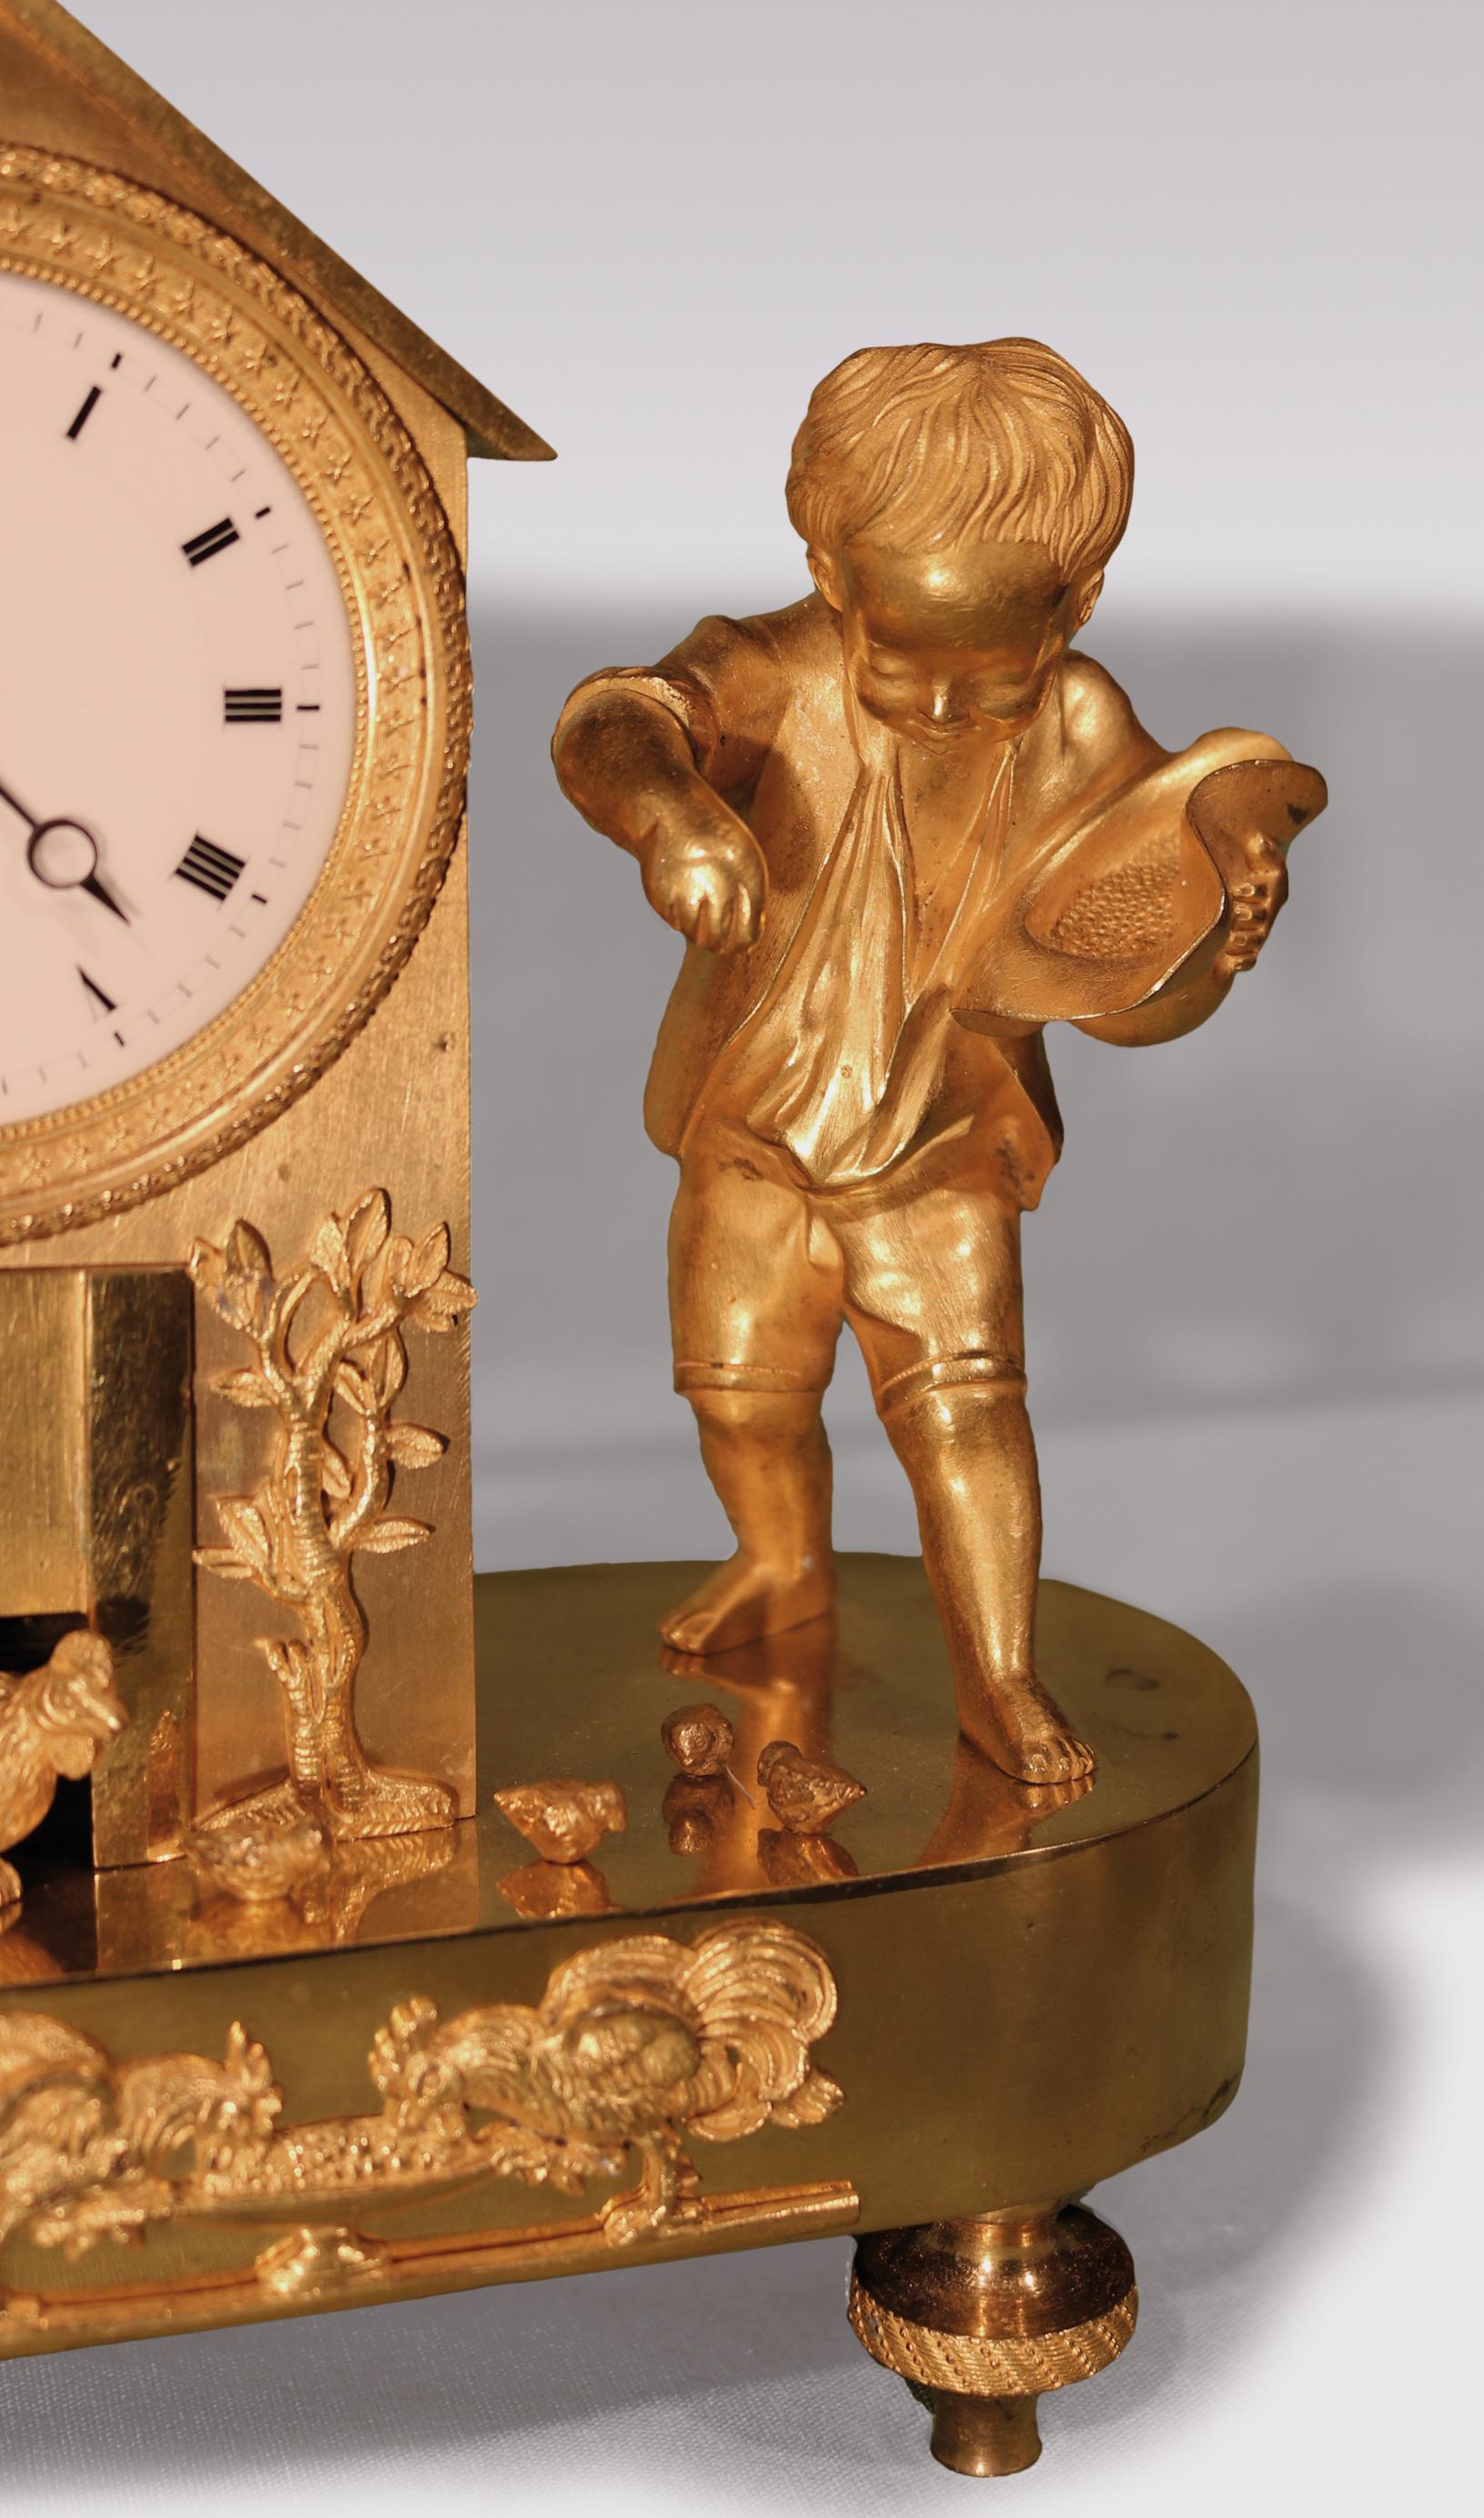 An early 19th century French ormolu mantel clock, having 8-day movement with enamel dial, mounted in “hen house” with urn and flower mounts to side, the oval base having hen and chicks being fed grain from the hat of a young boy, supported on engine